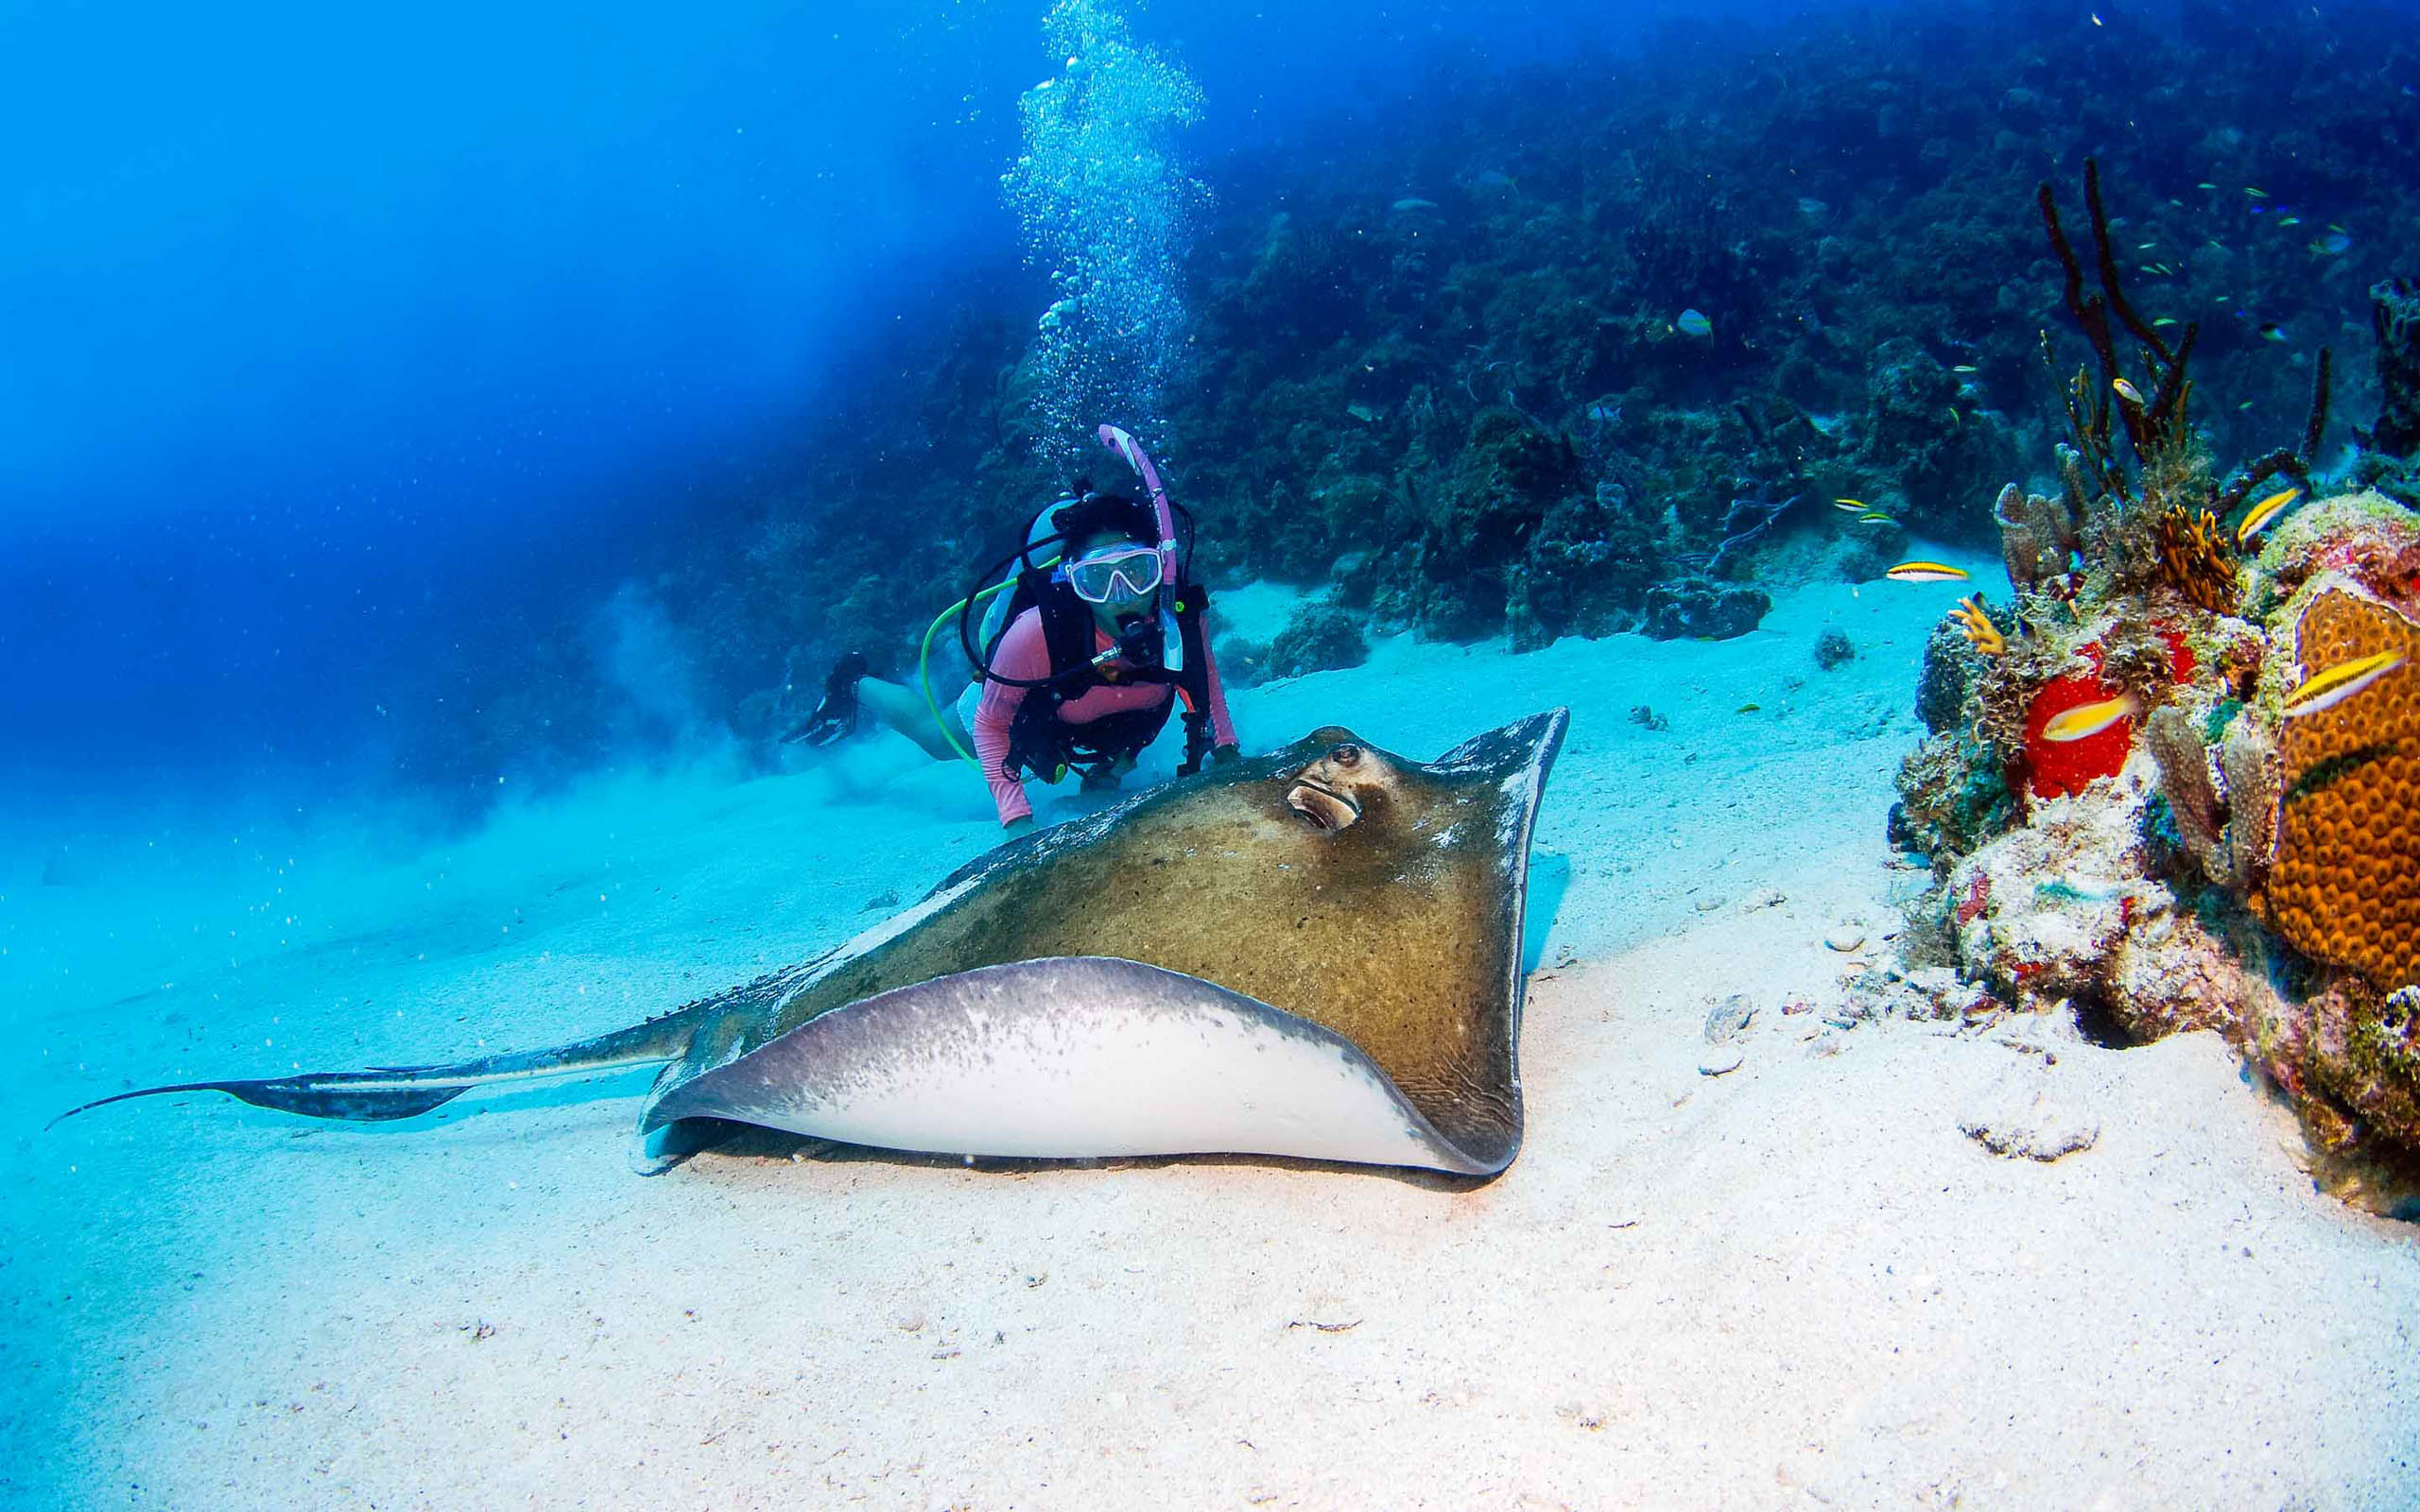 A scuba diver scuba diving with a sting ray.